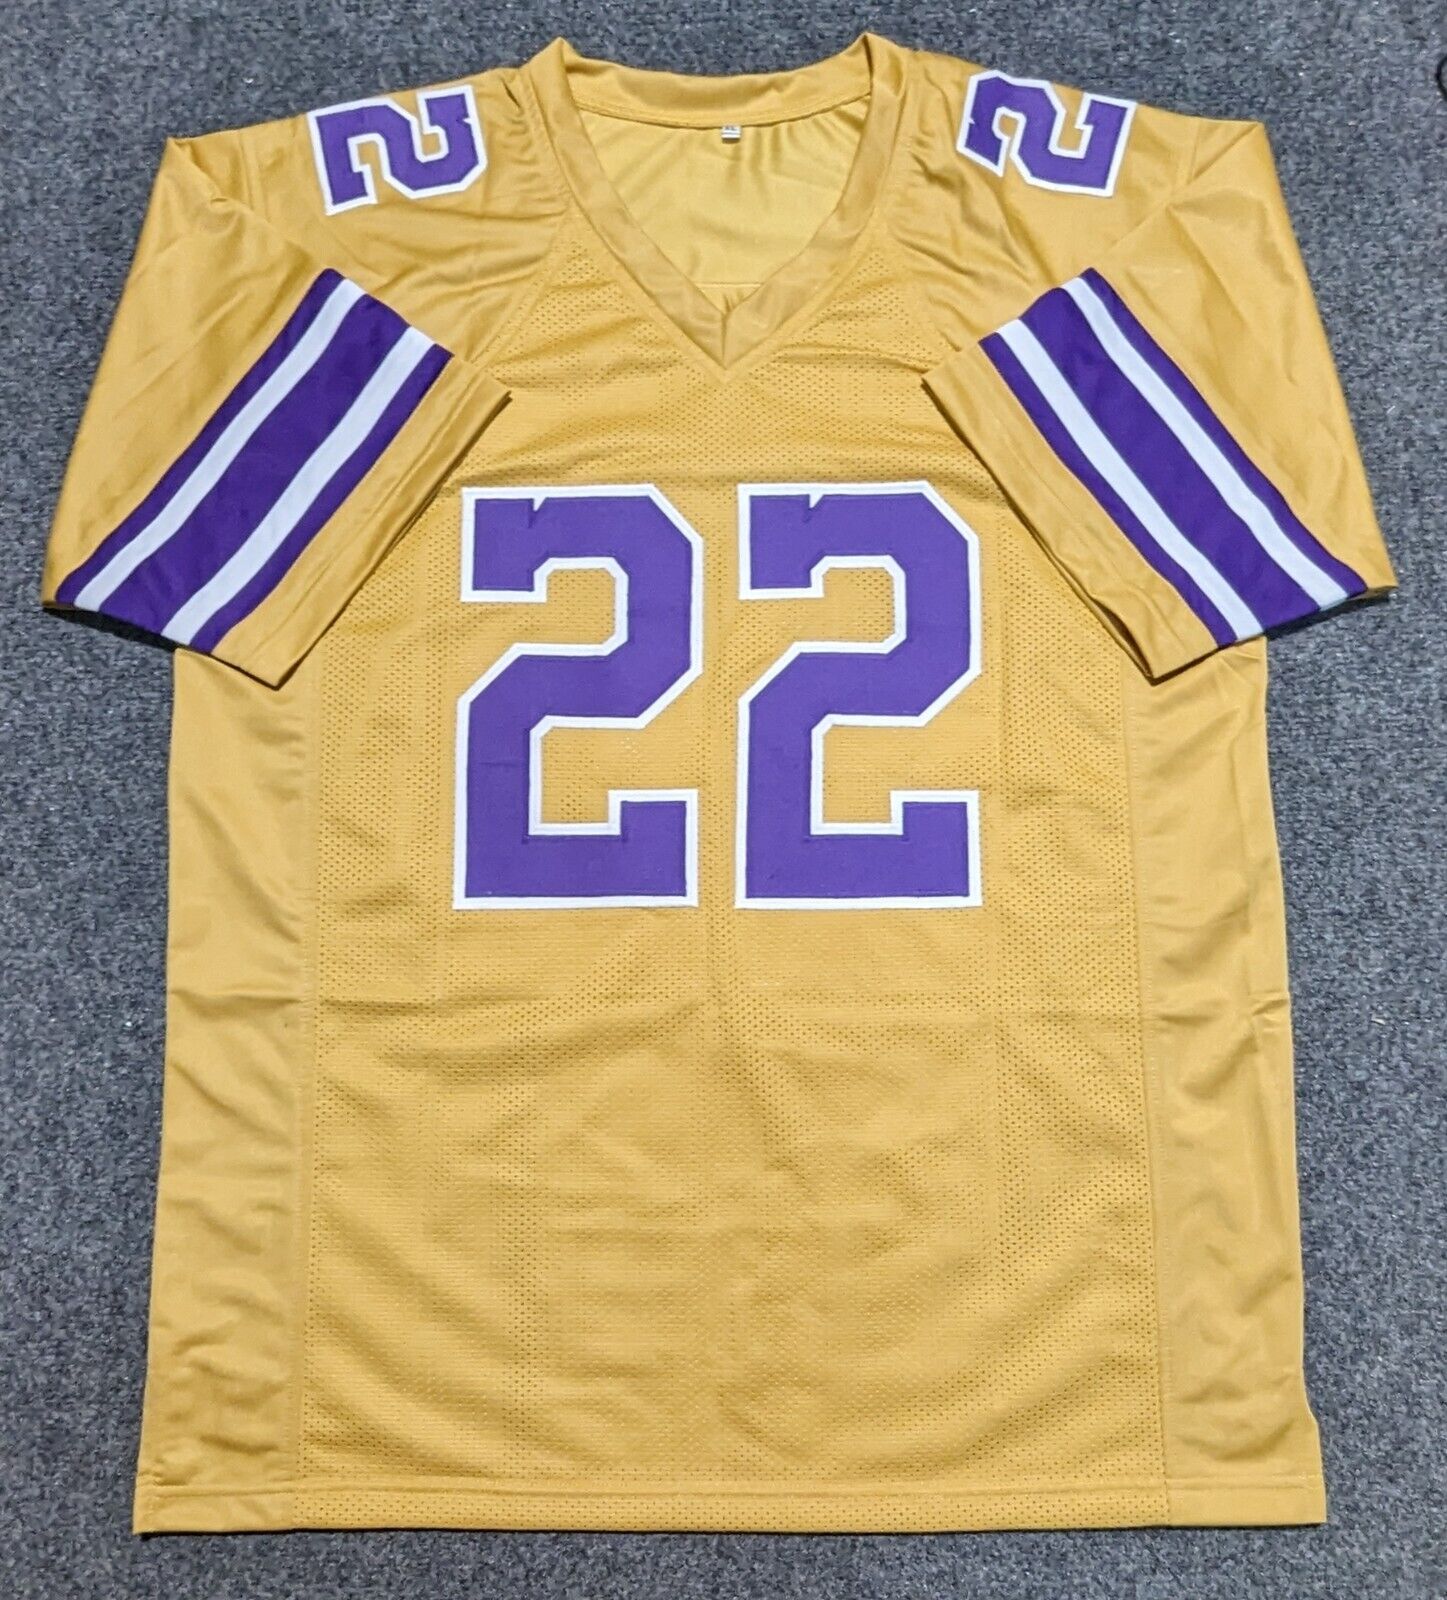 MVP Authentics Lsu Tigers Clyde Edwards-Helaire Autographed Signed Jersey Jsa Coa 152.10 sports jersey framing , jersey framing